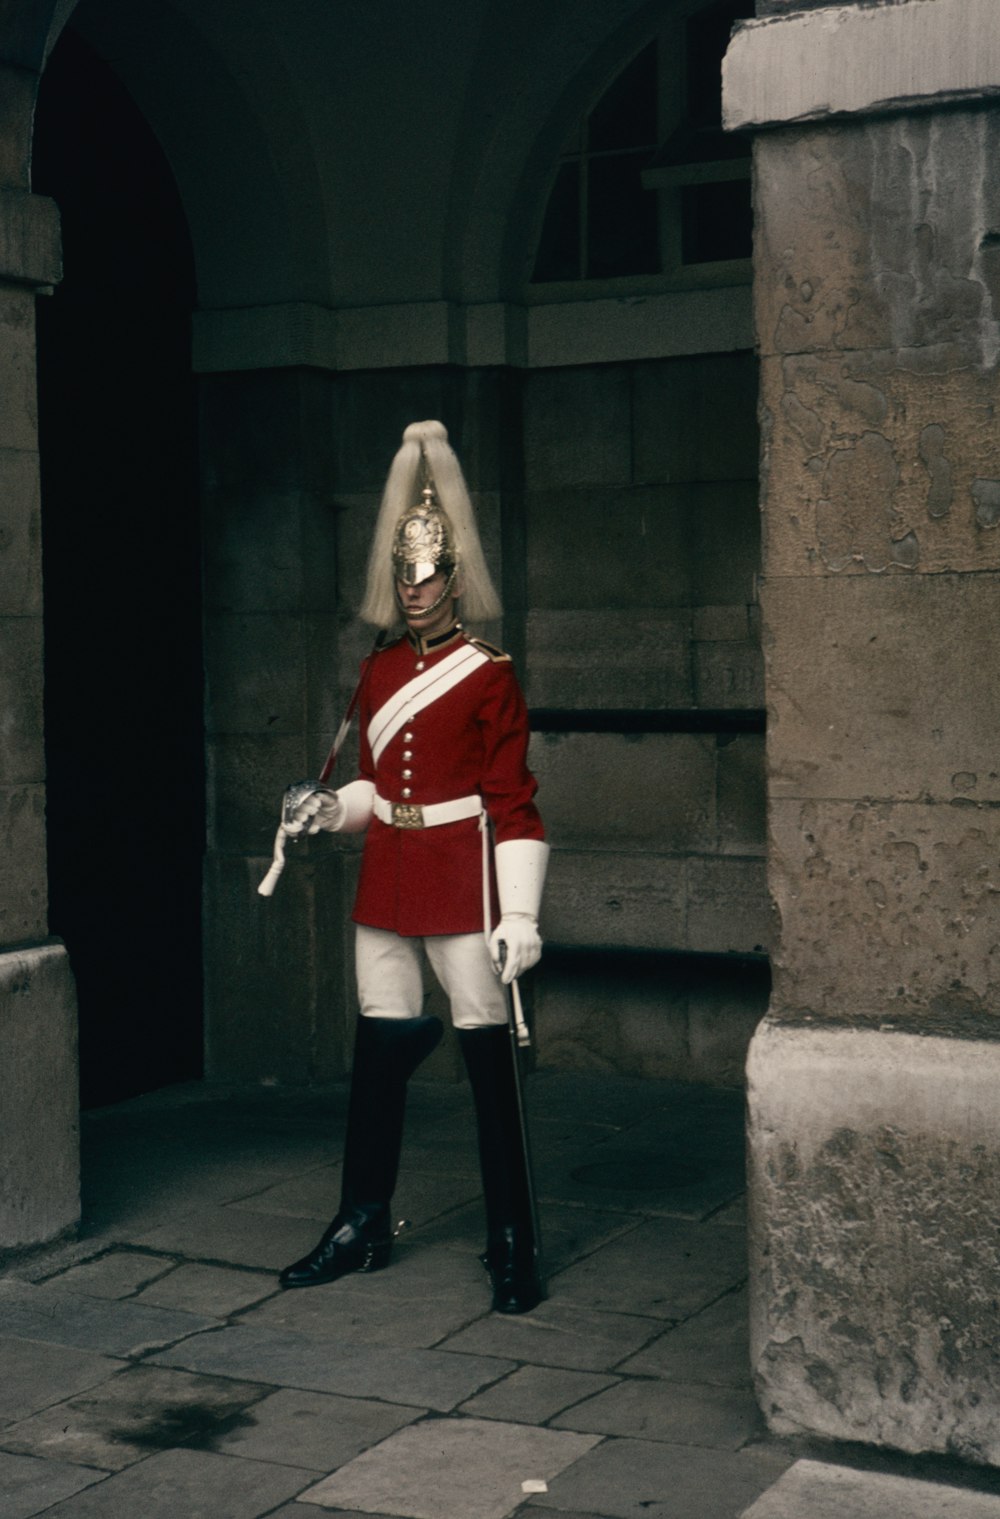 a man in a red uniform standing in a doorway